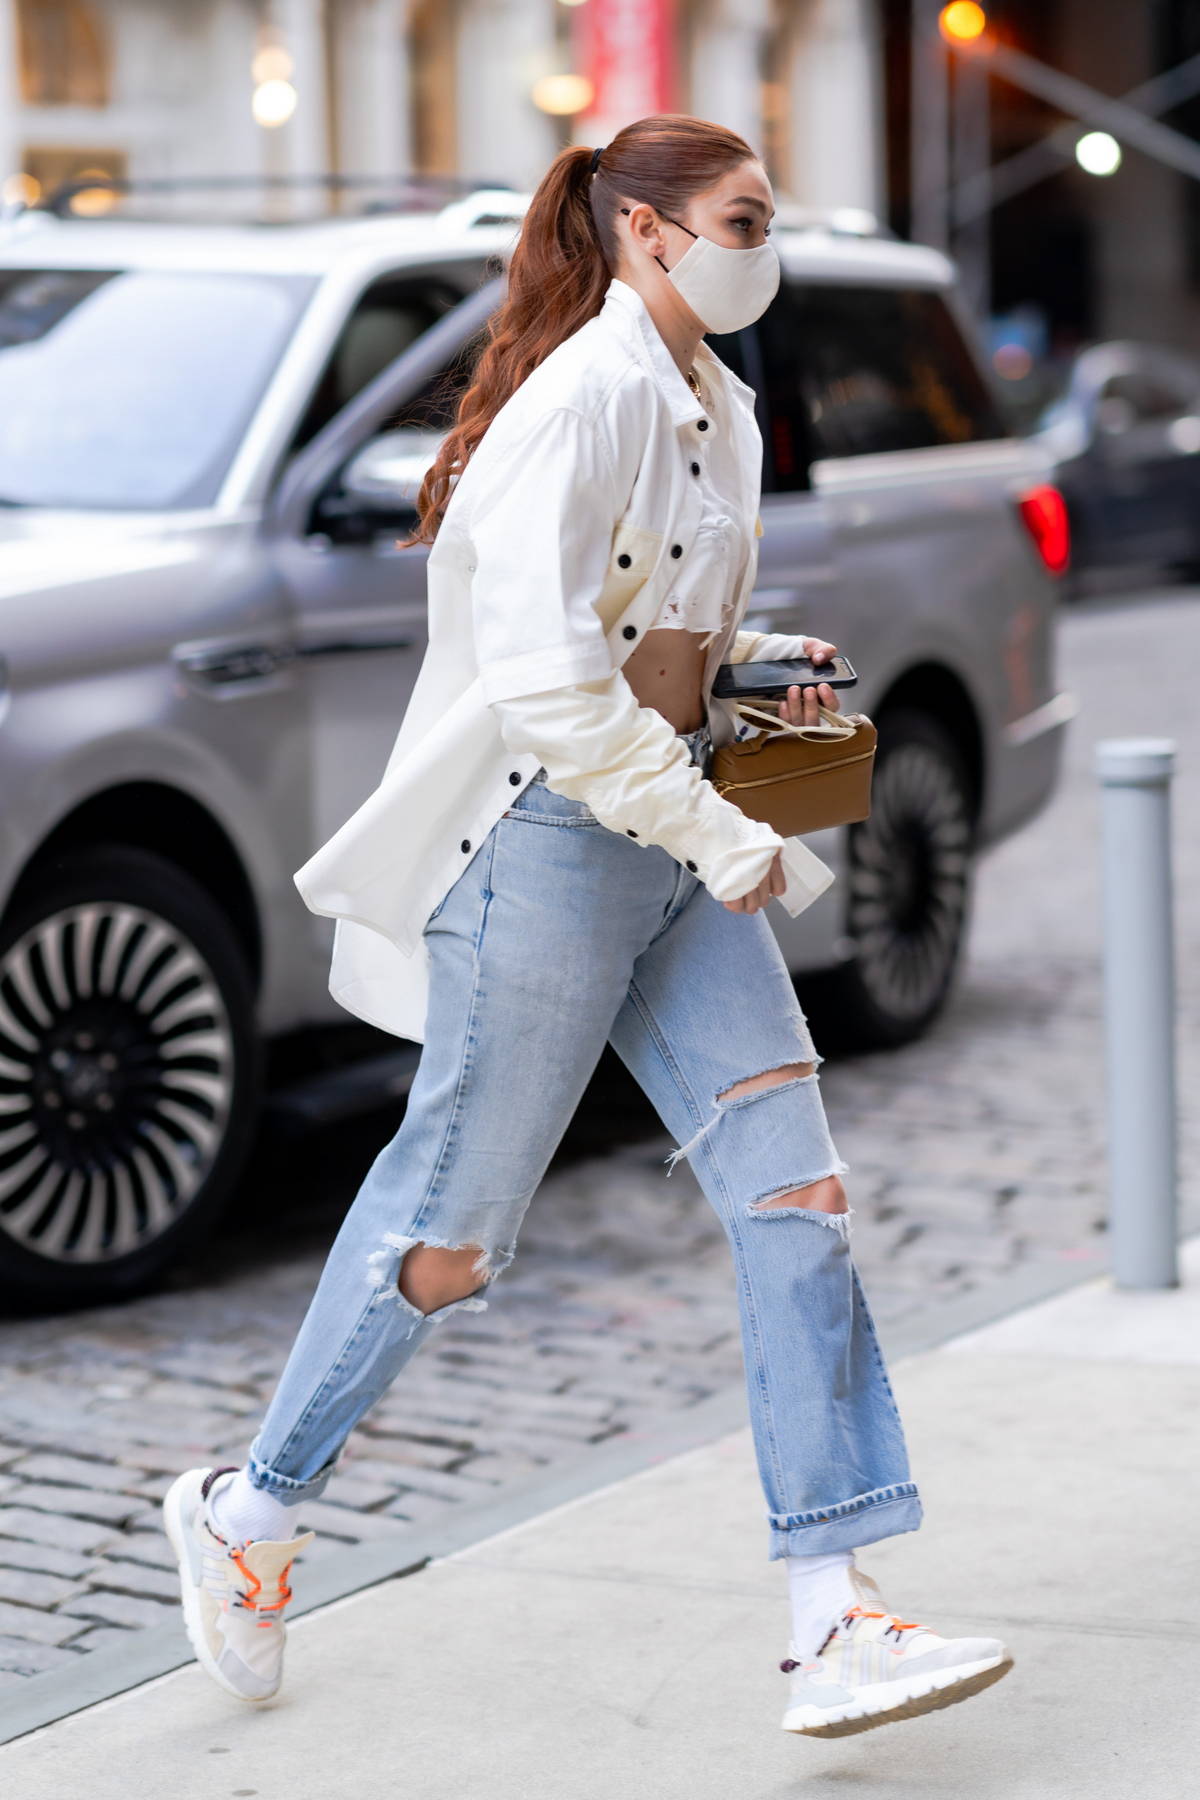 Gigi Hadid seen wearing blue jeans and a white tee shirt in New York City -  Linda Gaunt Communications